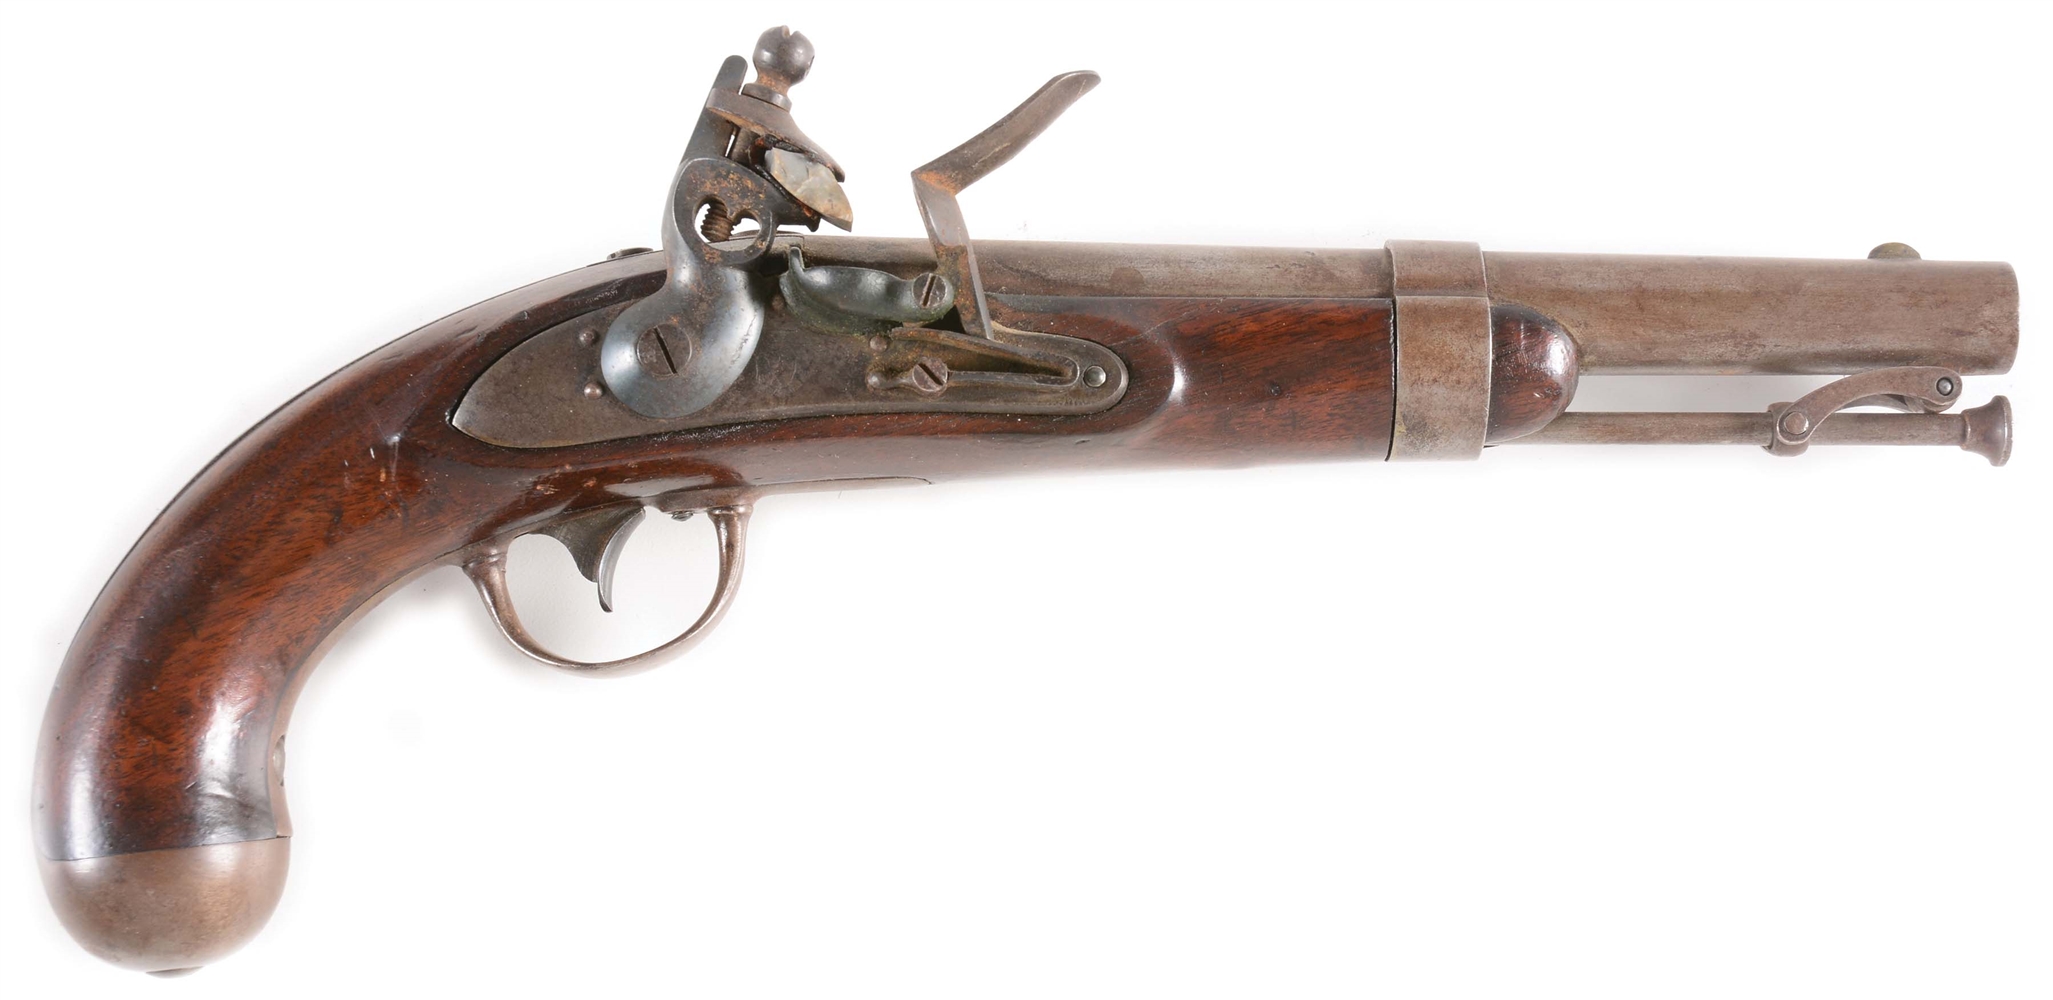 (A) AN EXTREMELY UNUSUAL "VARIANT EAGLE MARKED" MODEL 1836 US FLINTLOCK MARTIAL PISTOL.